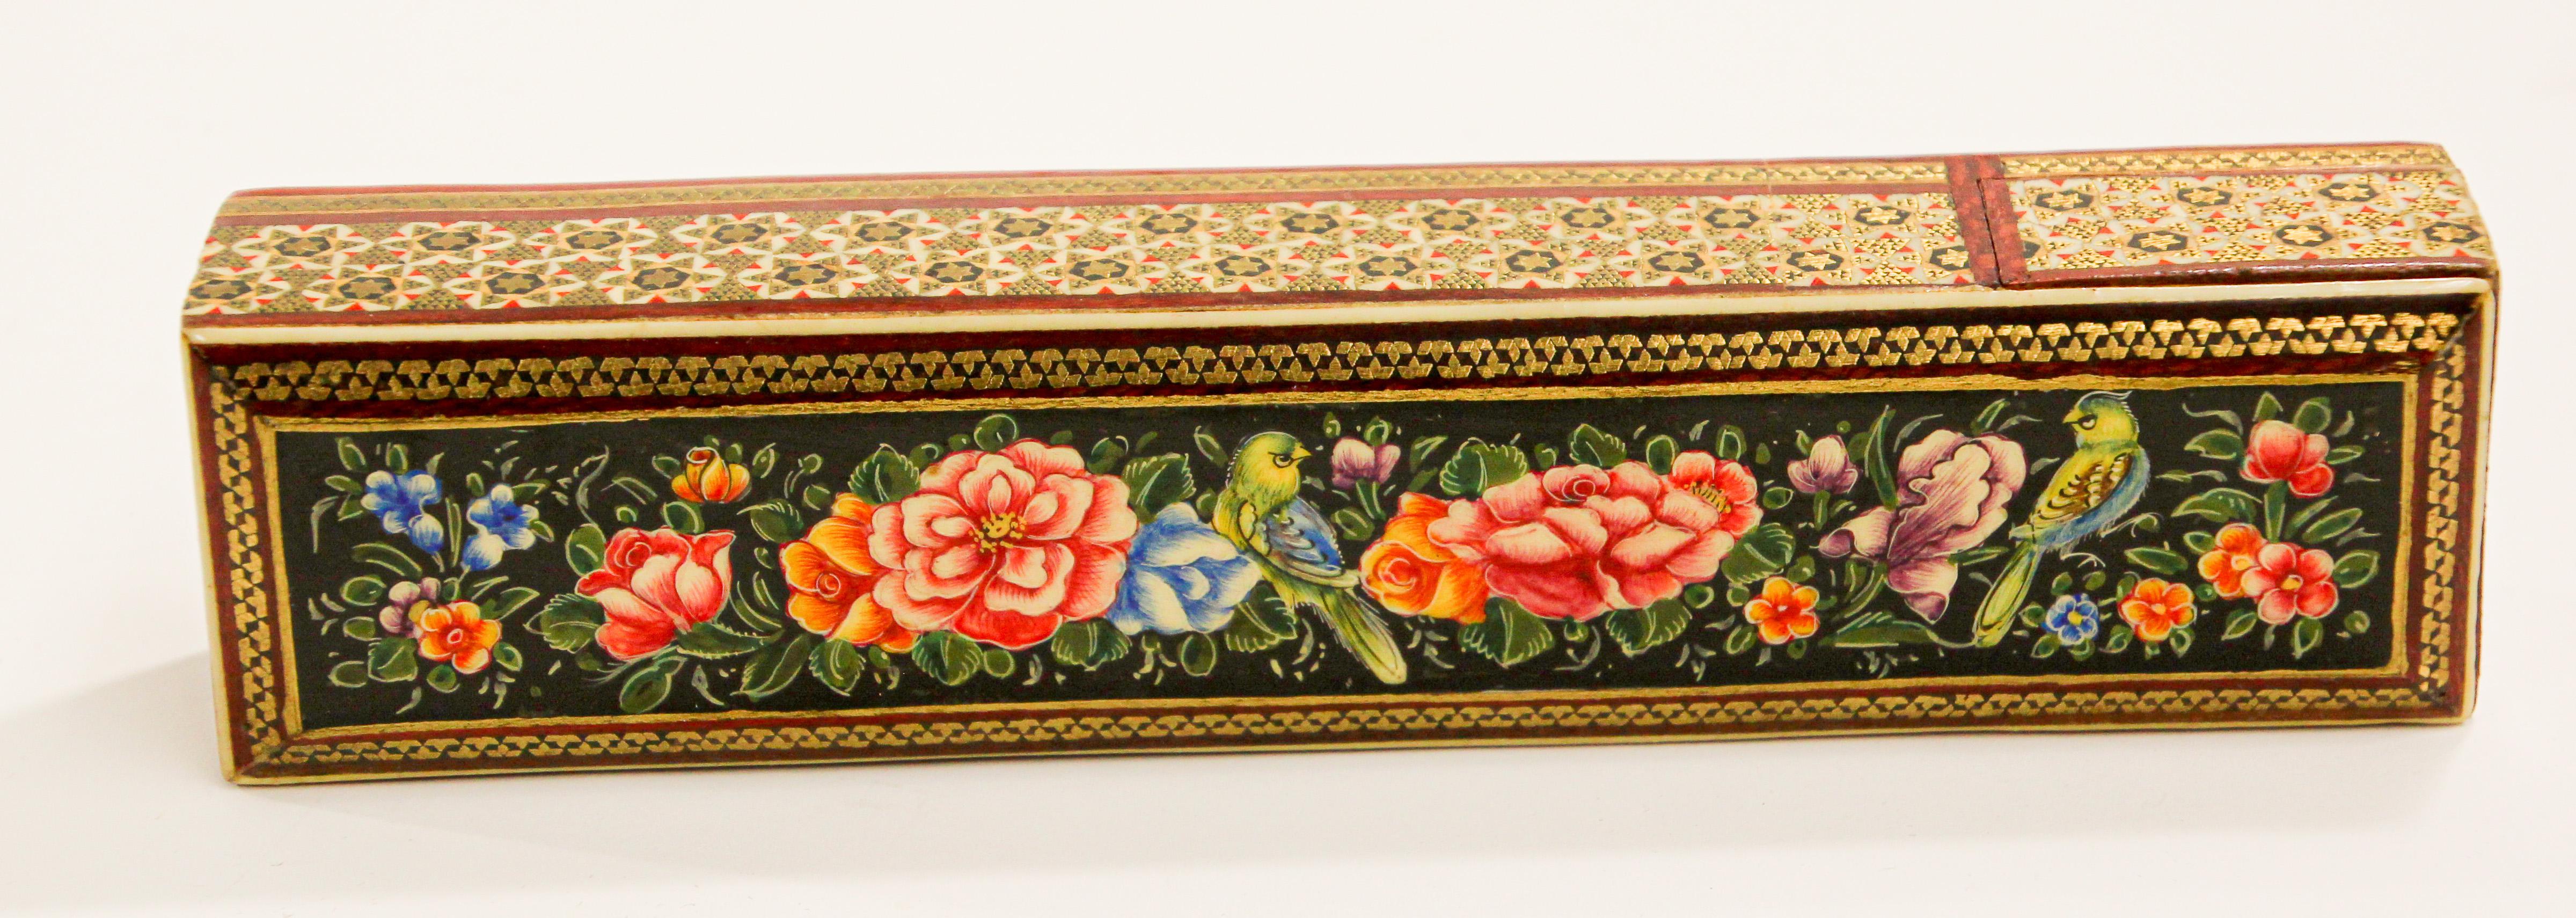 Persian Lacquer Pen Box Hand Painted with Floral Design In Good Condition For Sale In North Hollywood, CA